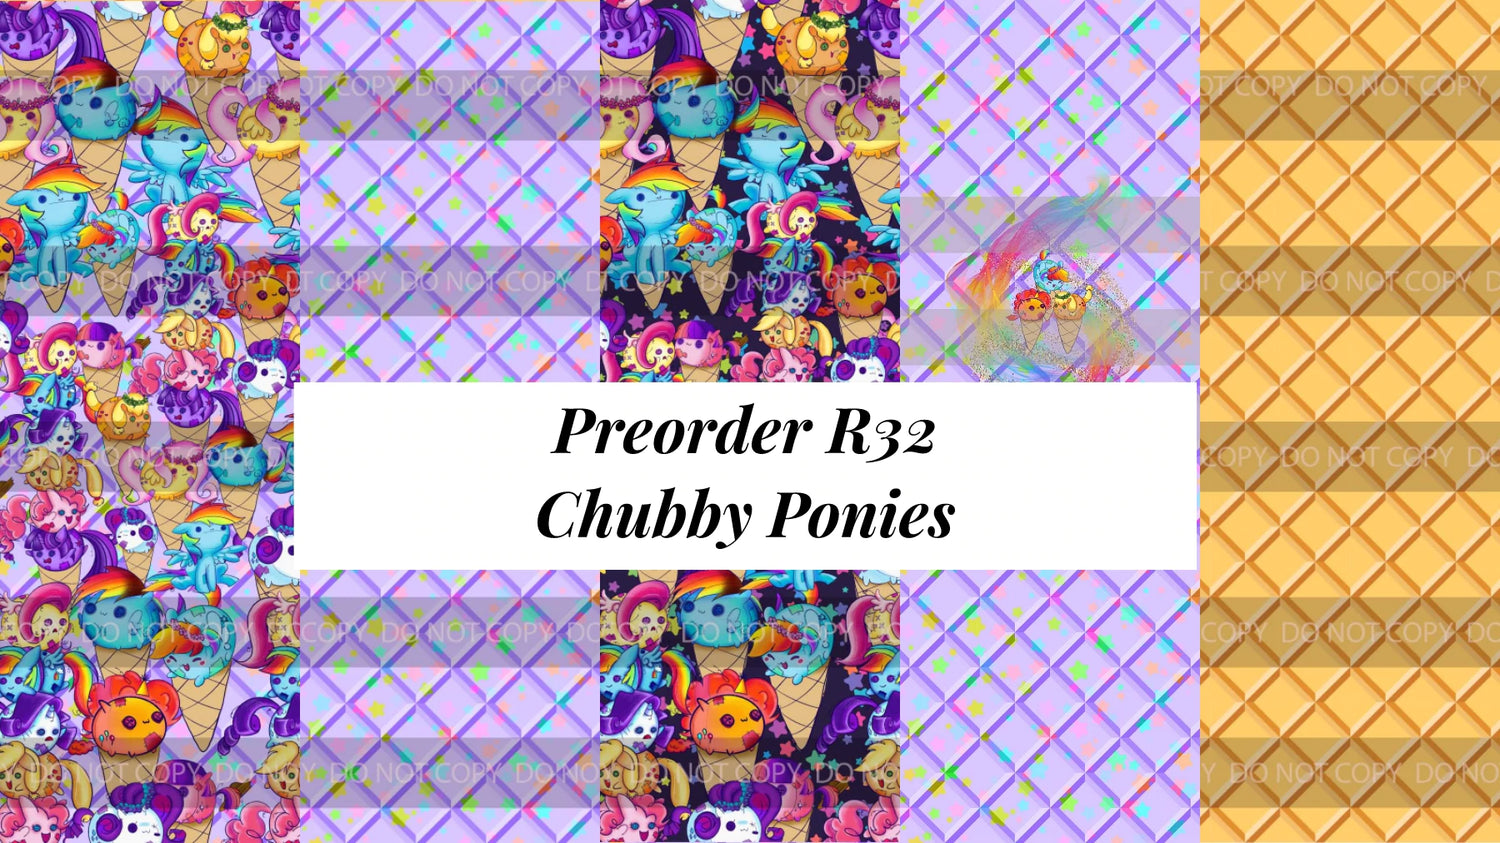 Preorder R32 Chubby Ponies